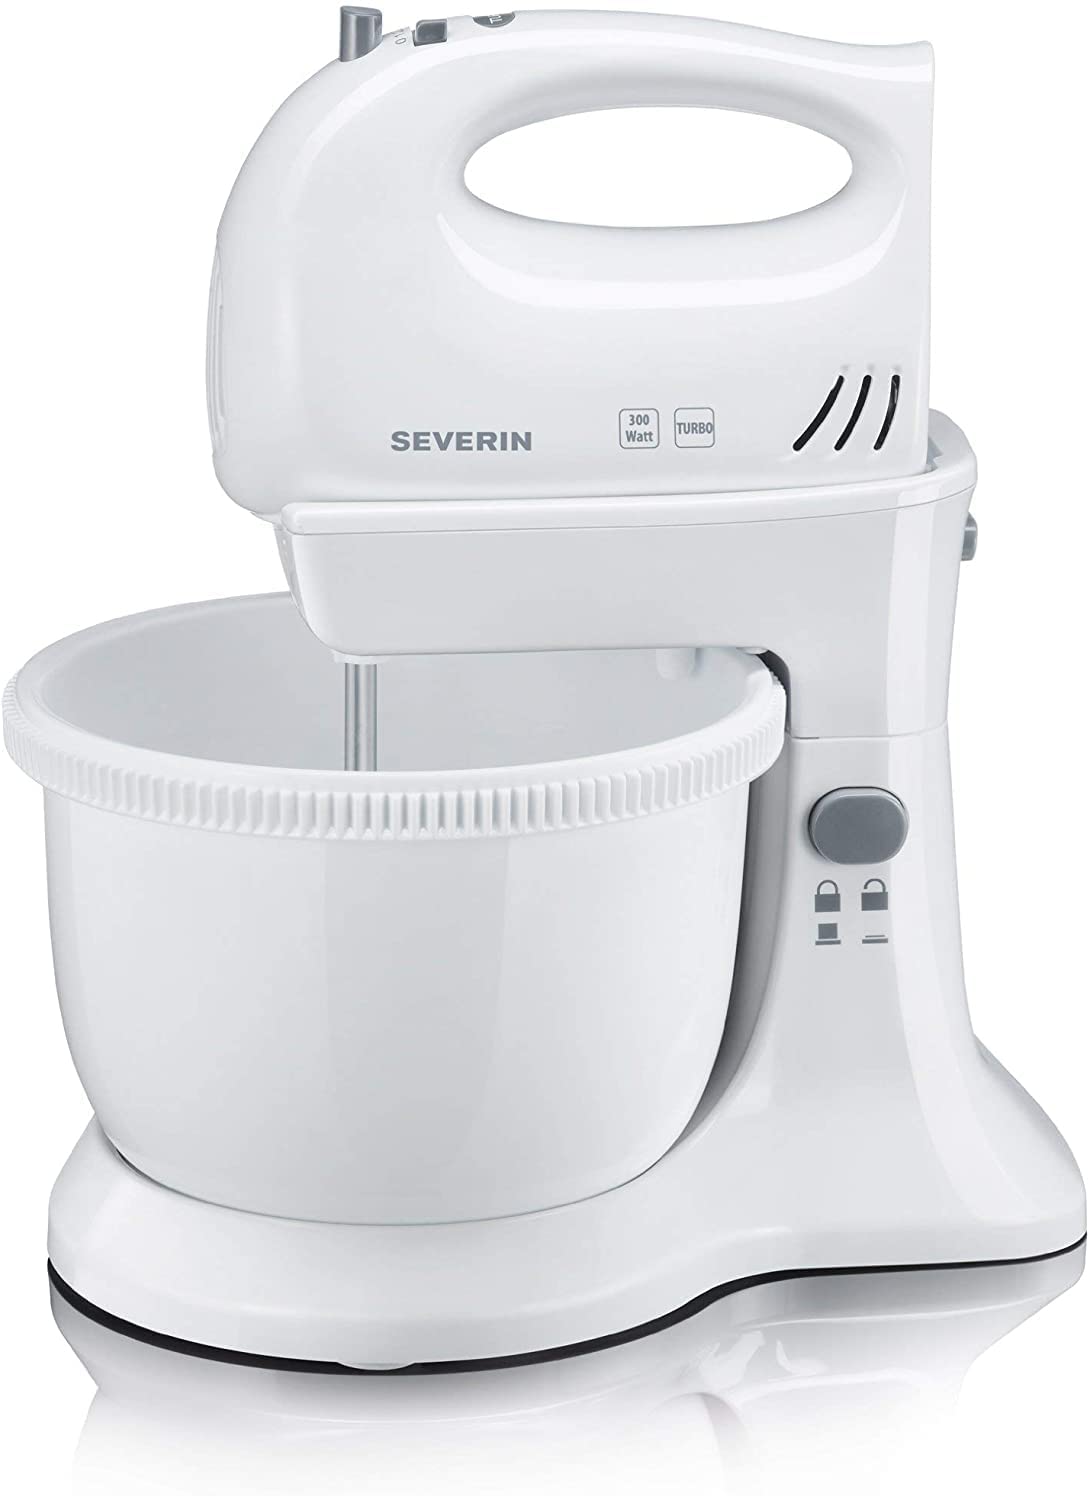 SEVERIN HM 3810 Hand Mixer Set - 300 W - Includes Table Stand and 3 L Mixing Bowl - White/Grey